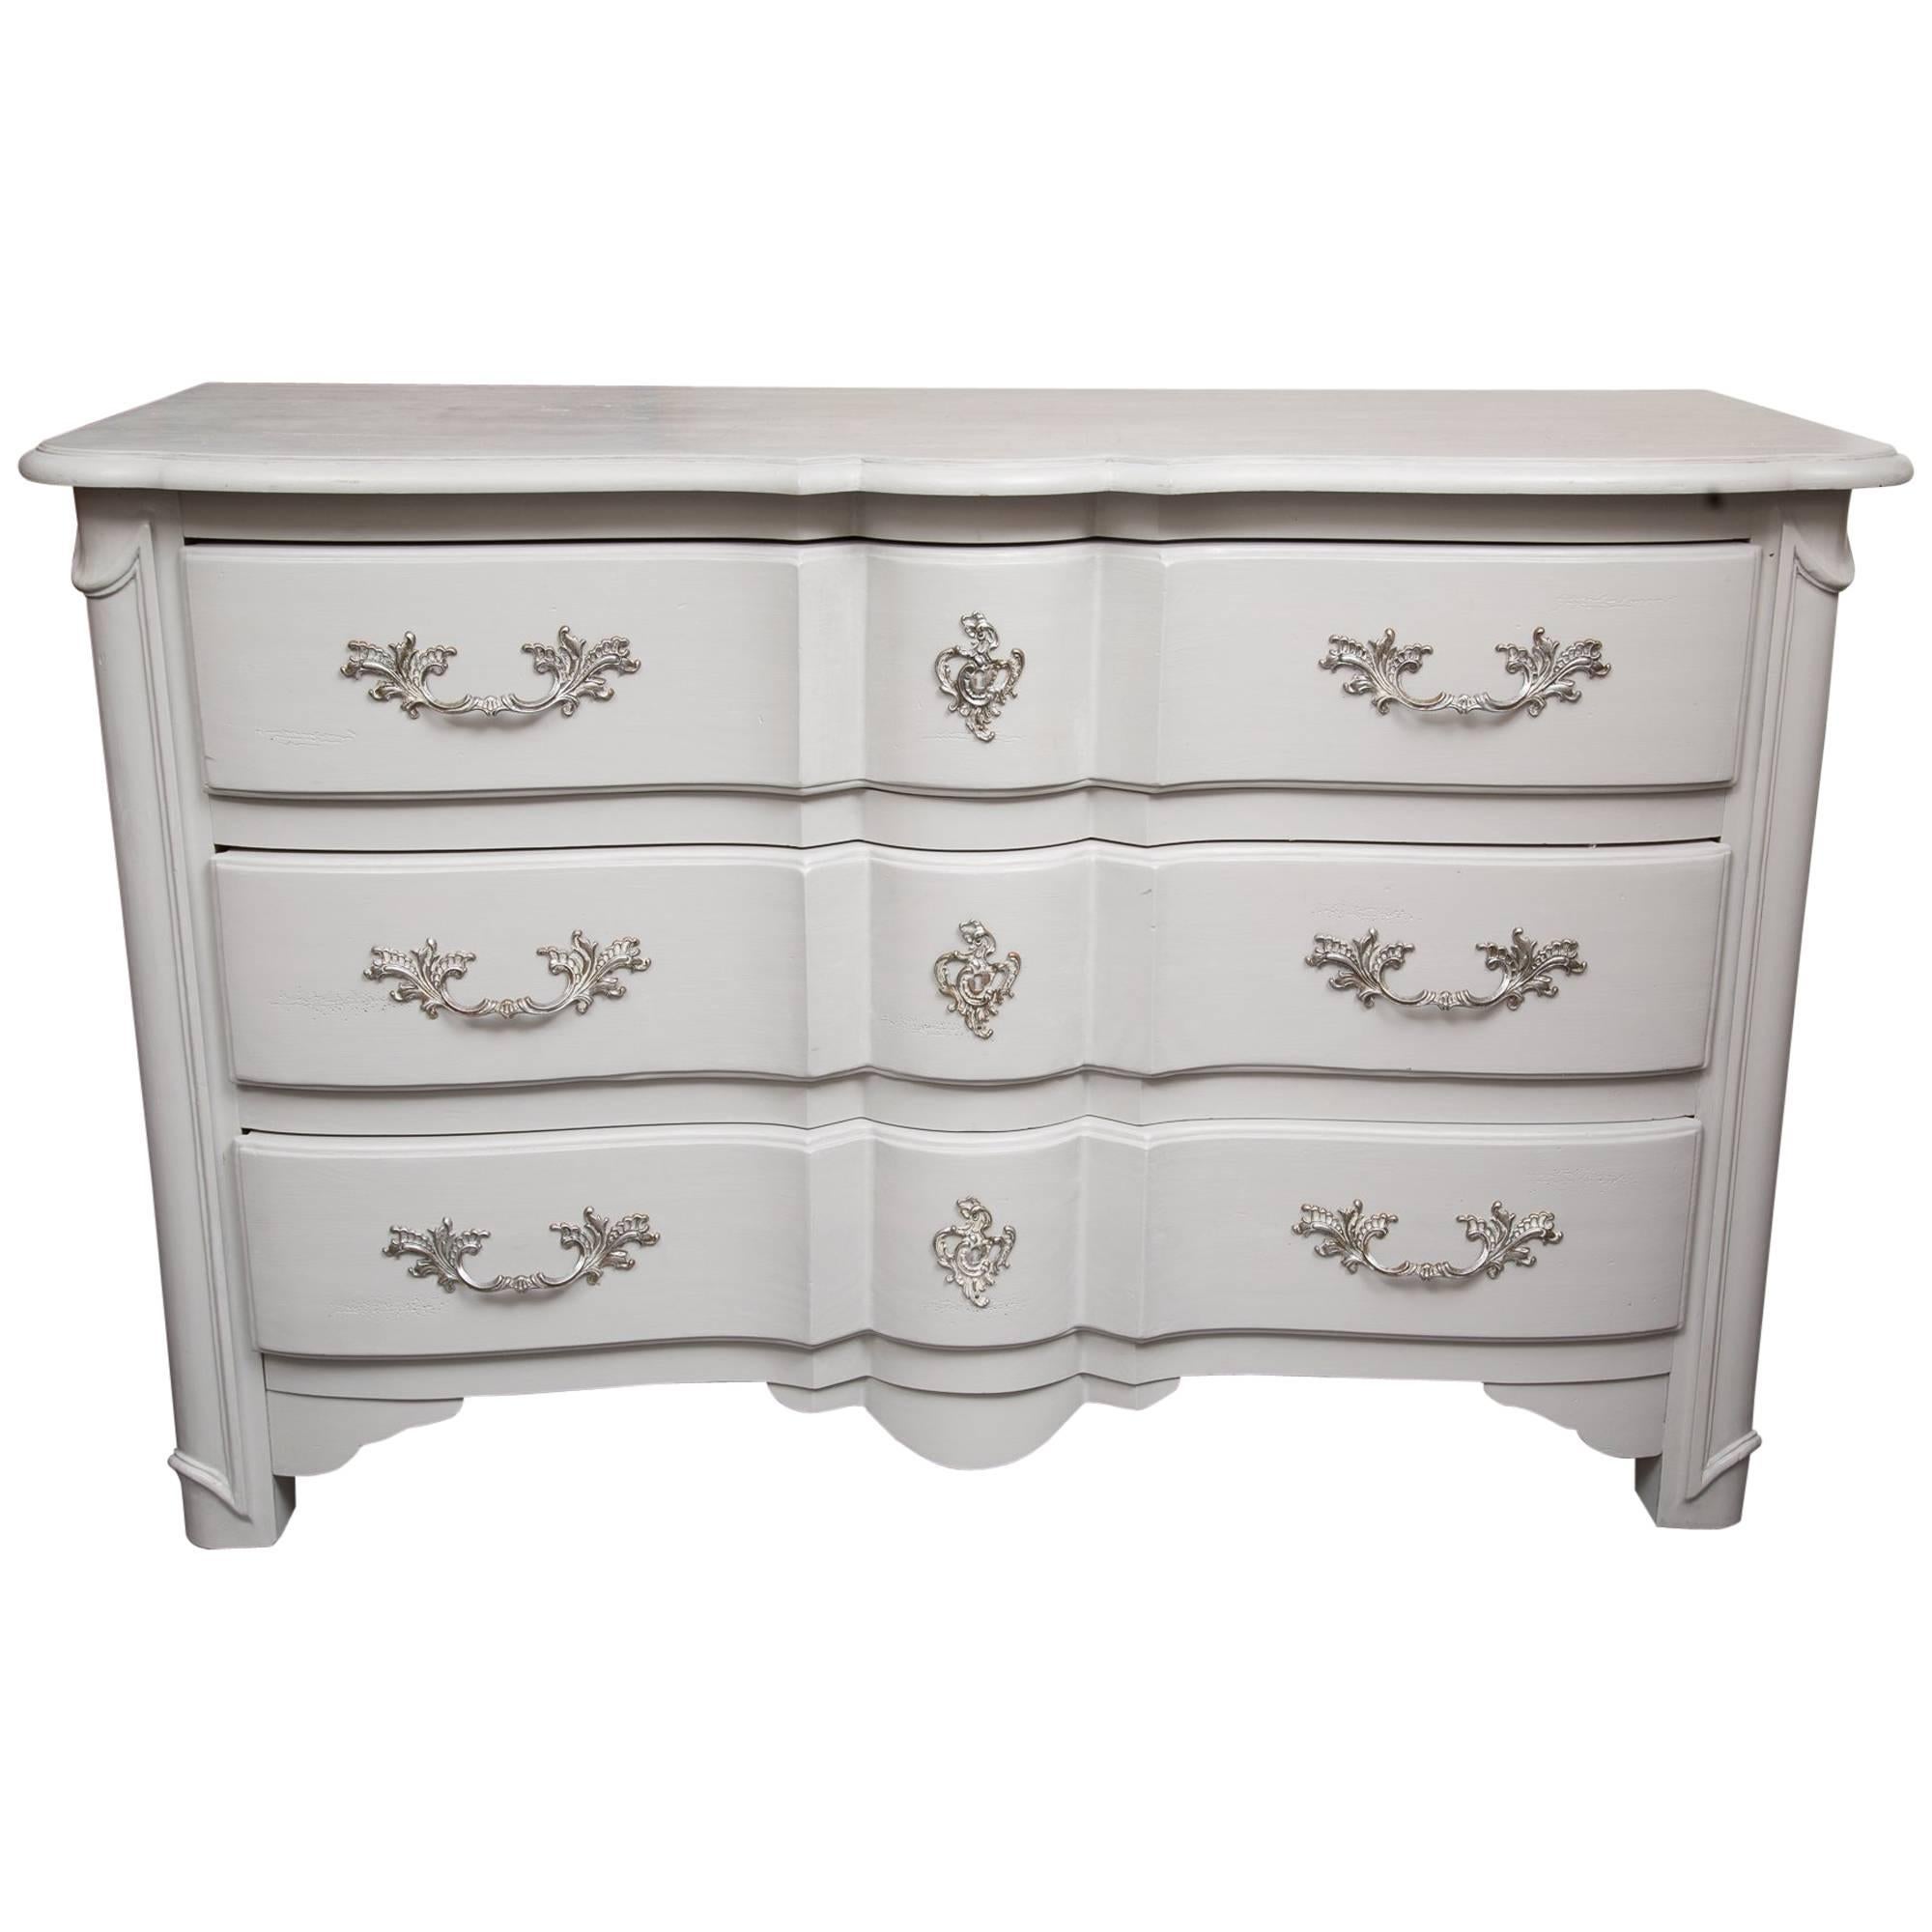 Gray Painted Block Front Chest of Drawers